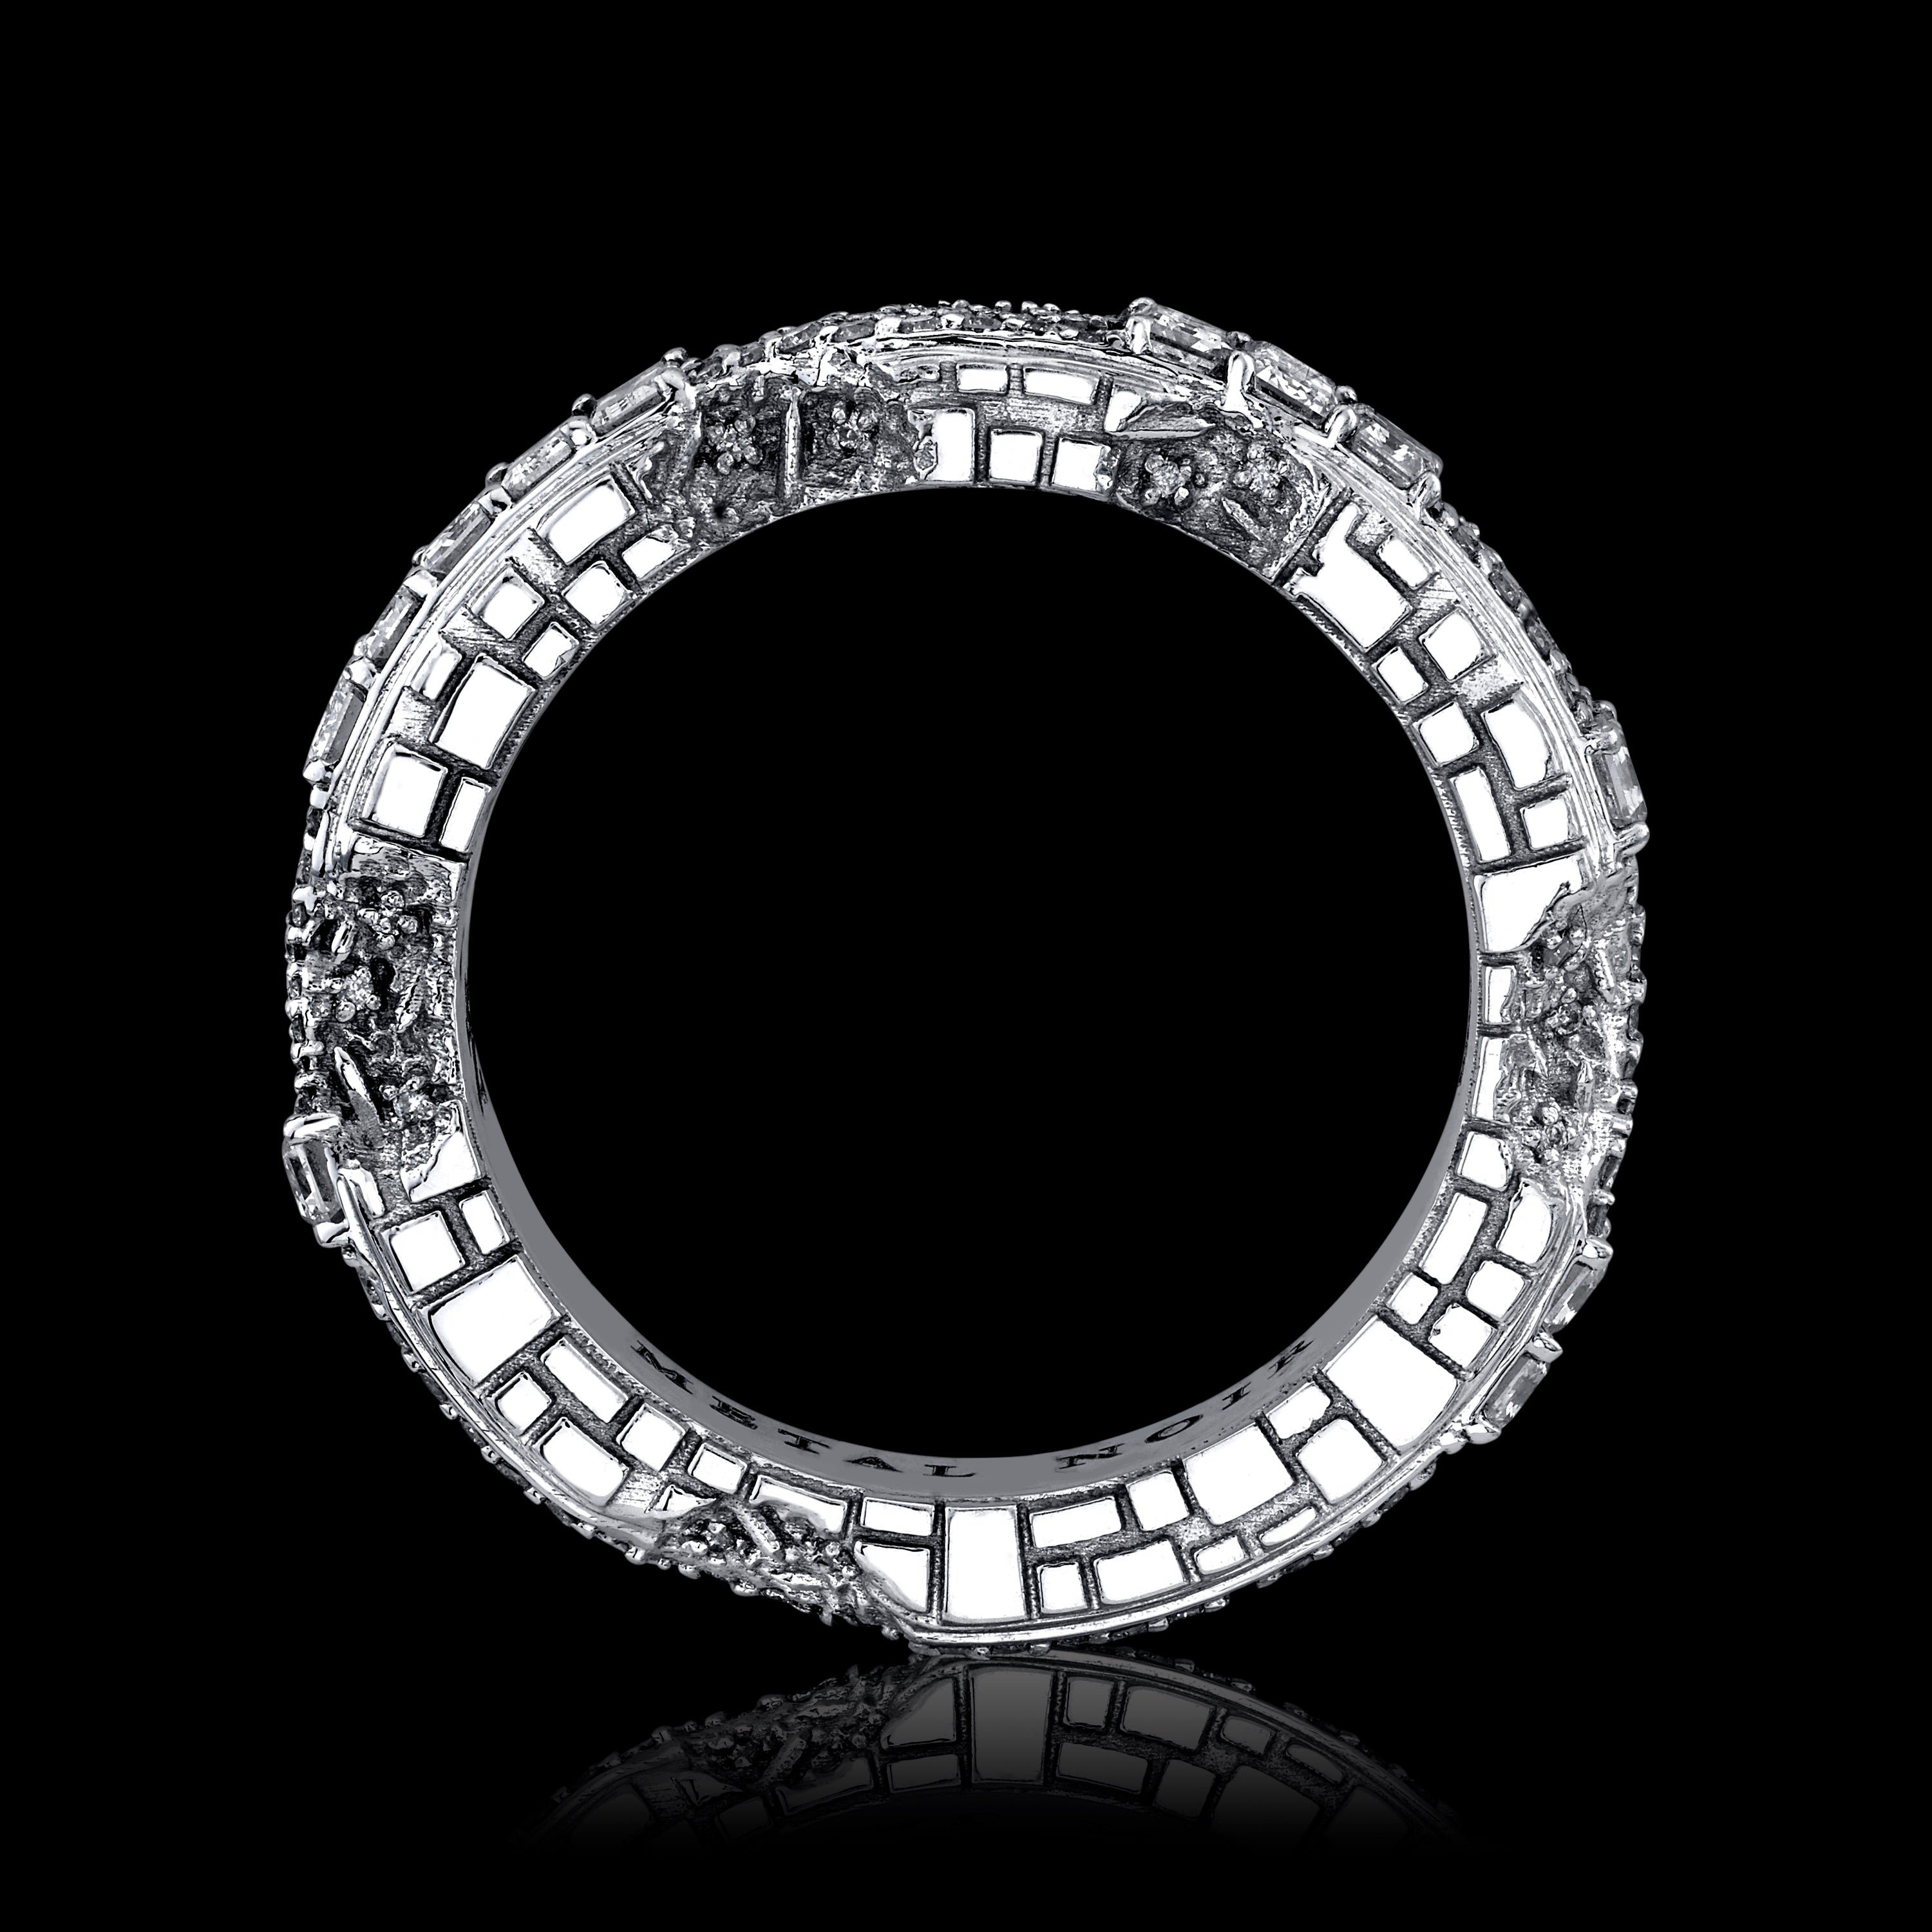 ‘Eroded Architecture’ Ring in solid 18k white gold with 10 point emerald cut + round brilliant diamonds • Edition of 10